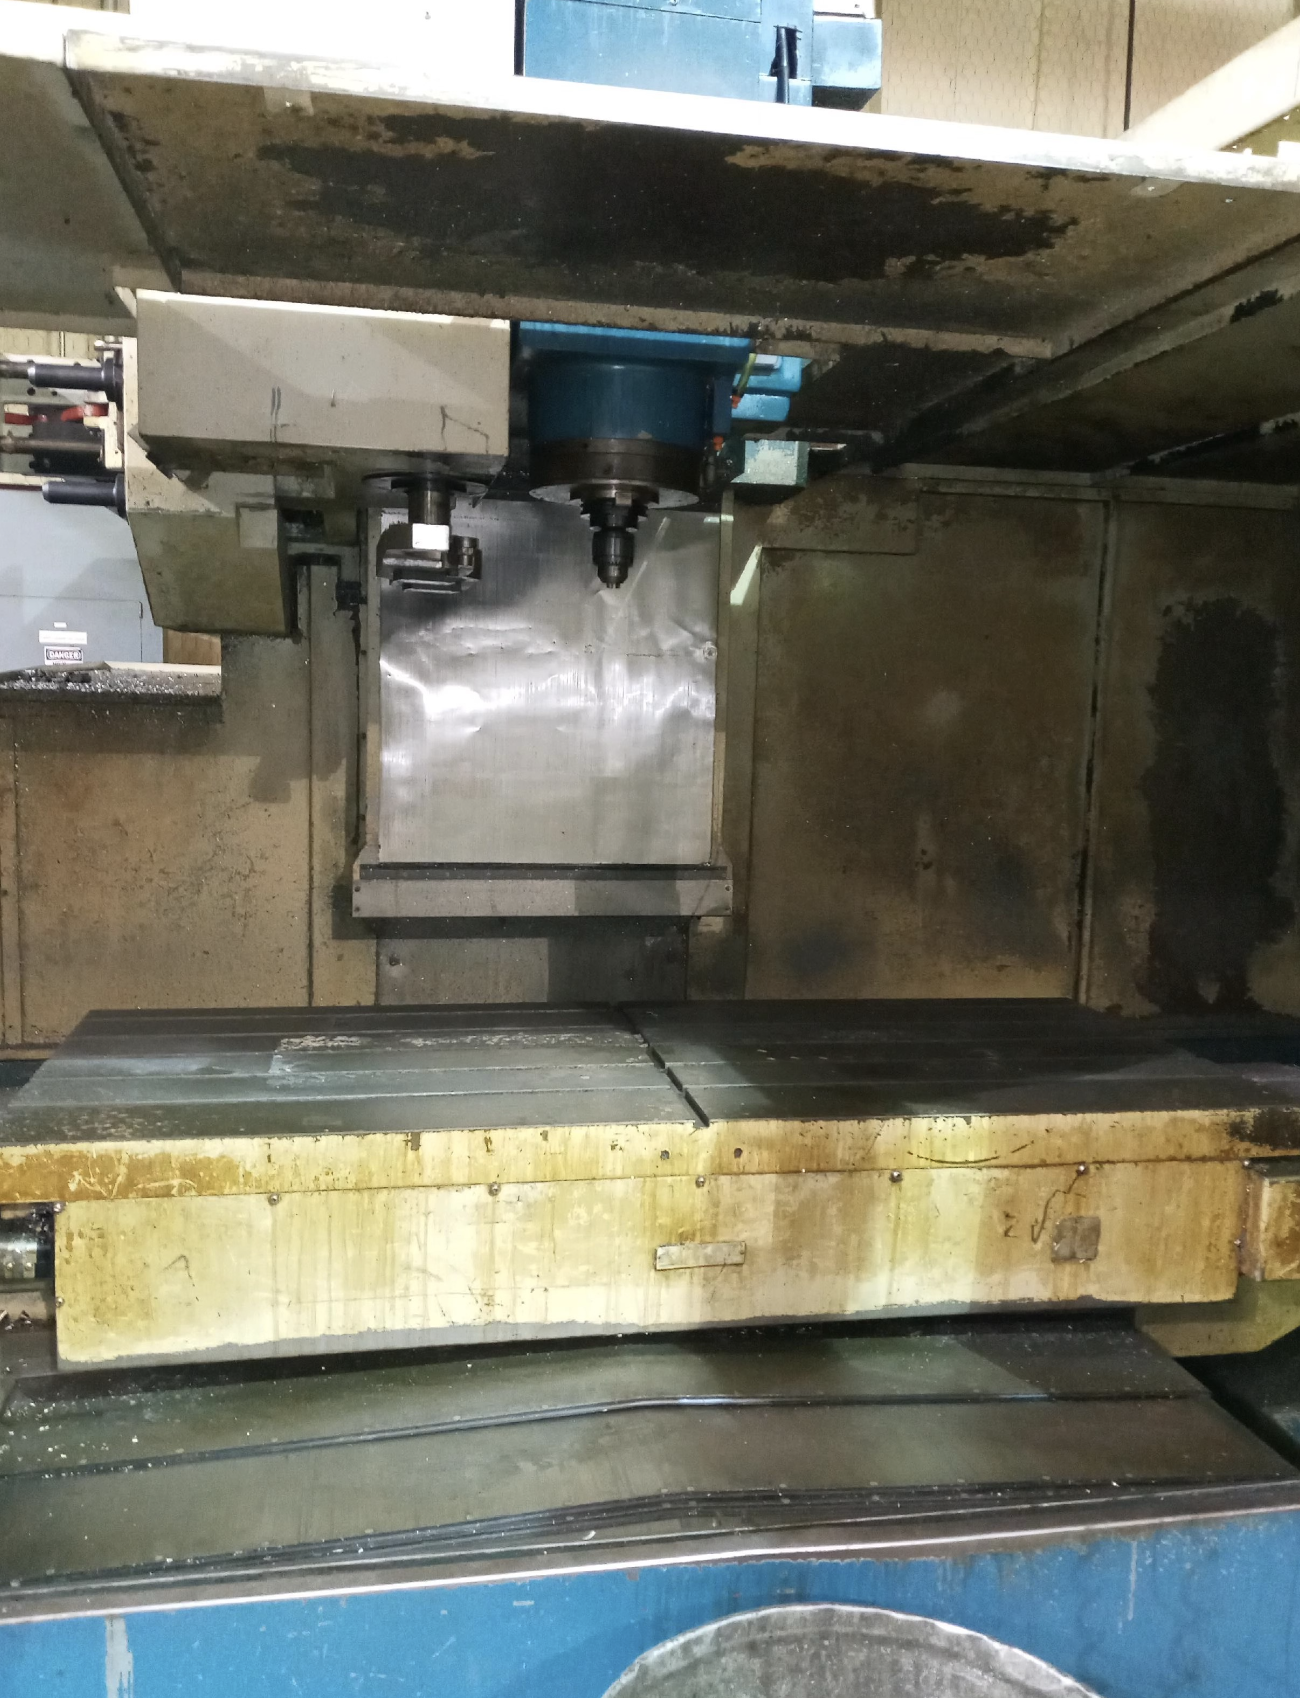 1996 DAEWOO ACE V65 Vertical Machining Centers | Toolquip, Inc.